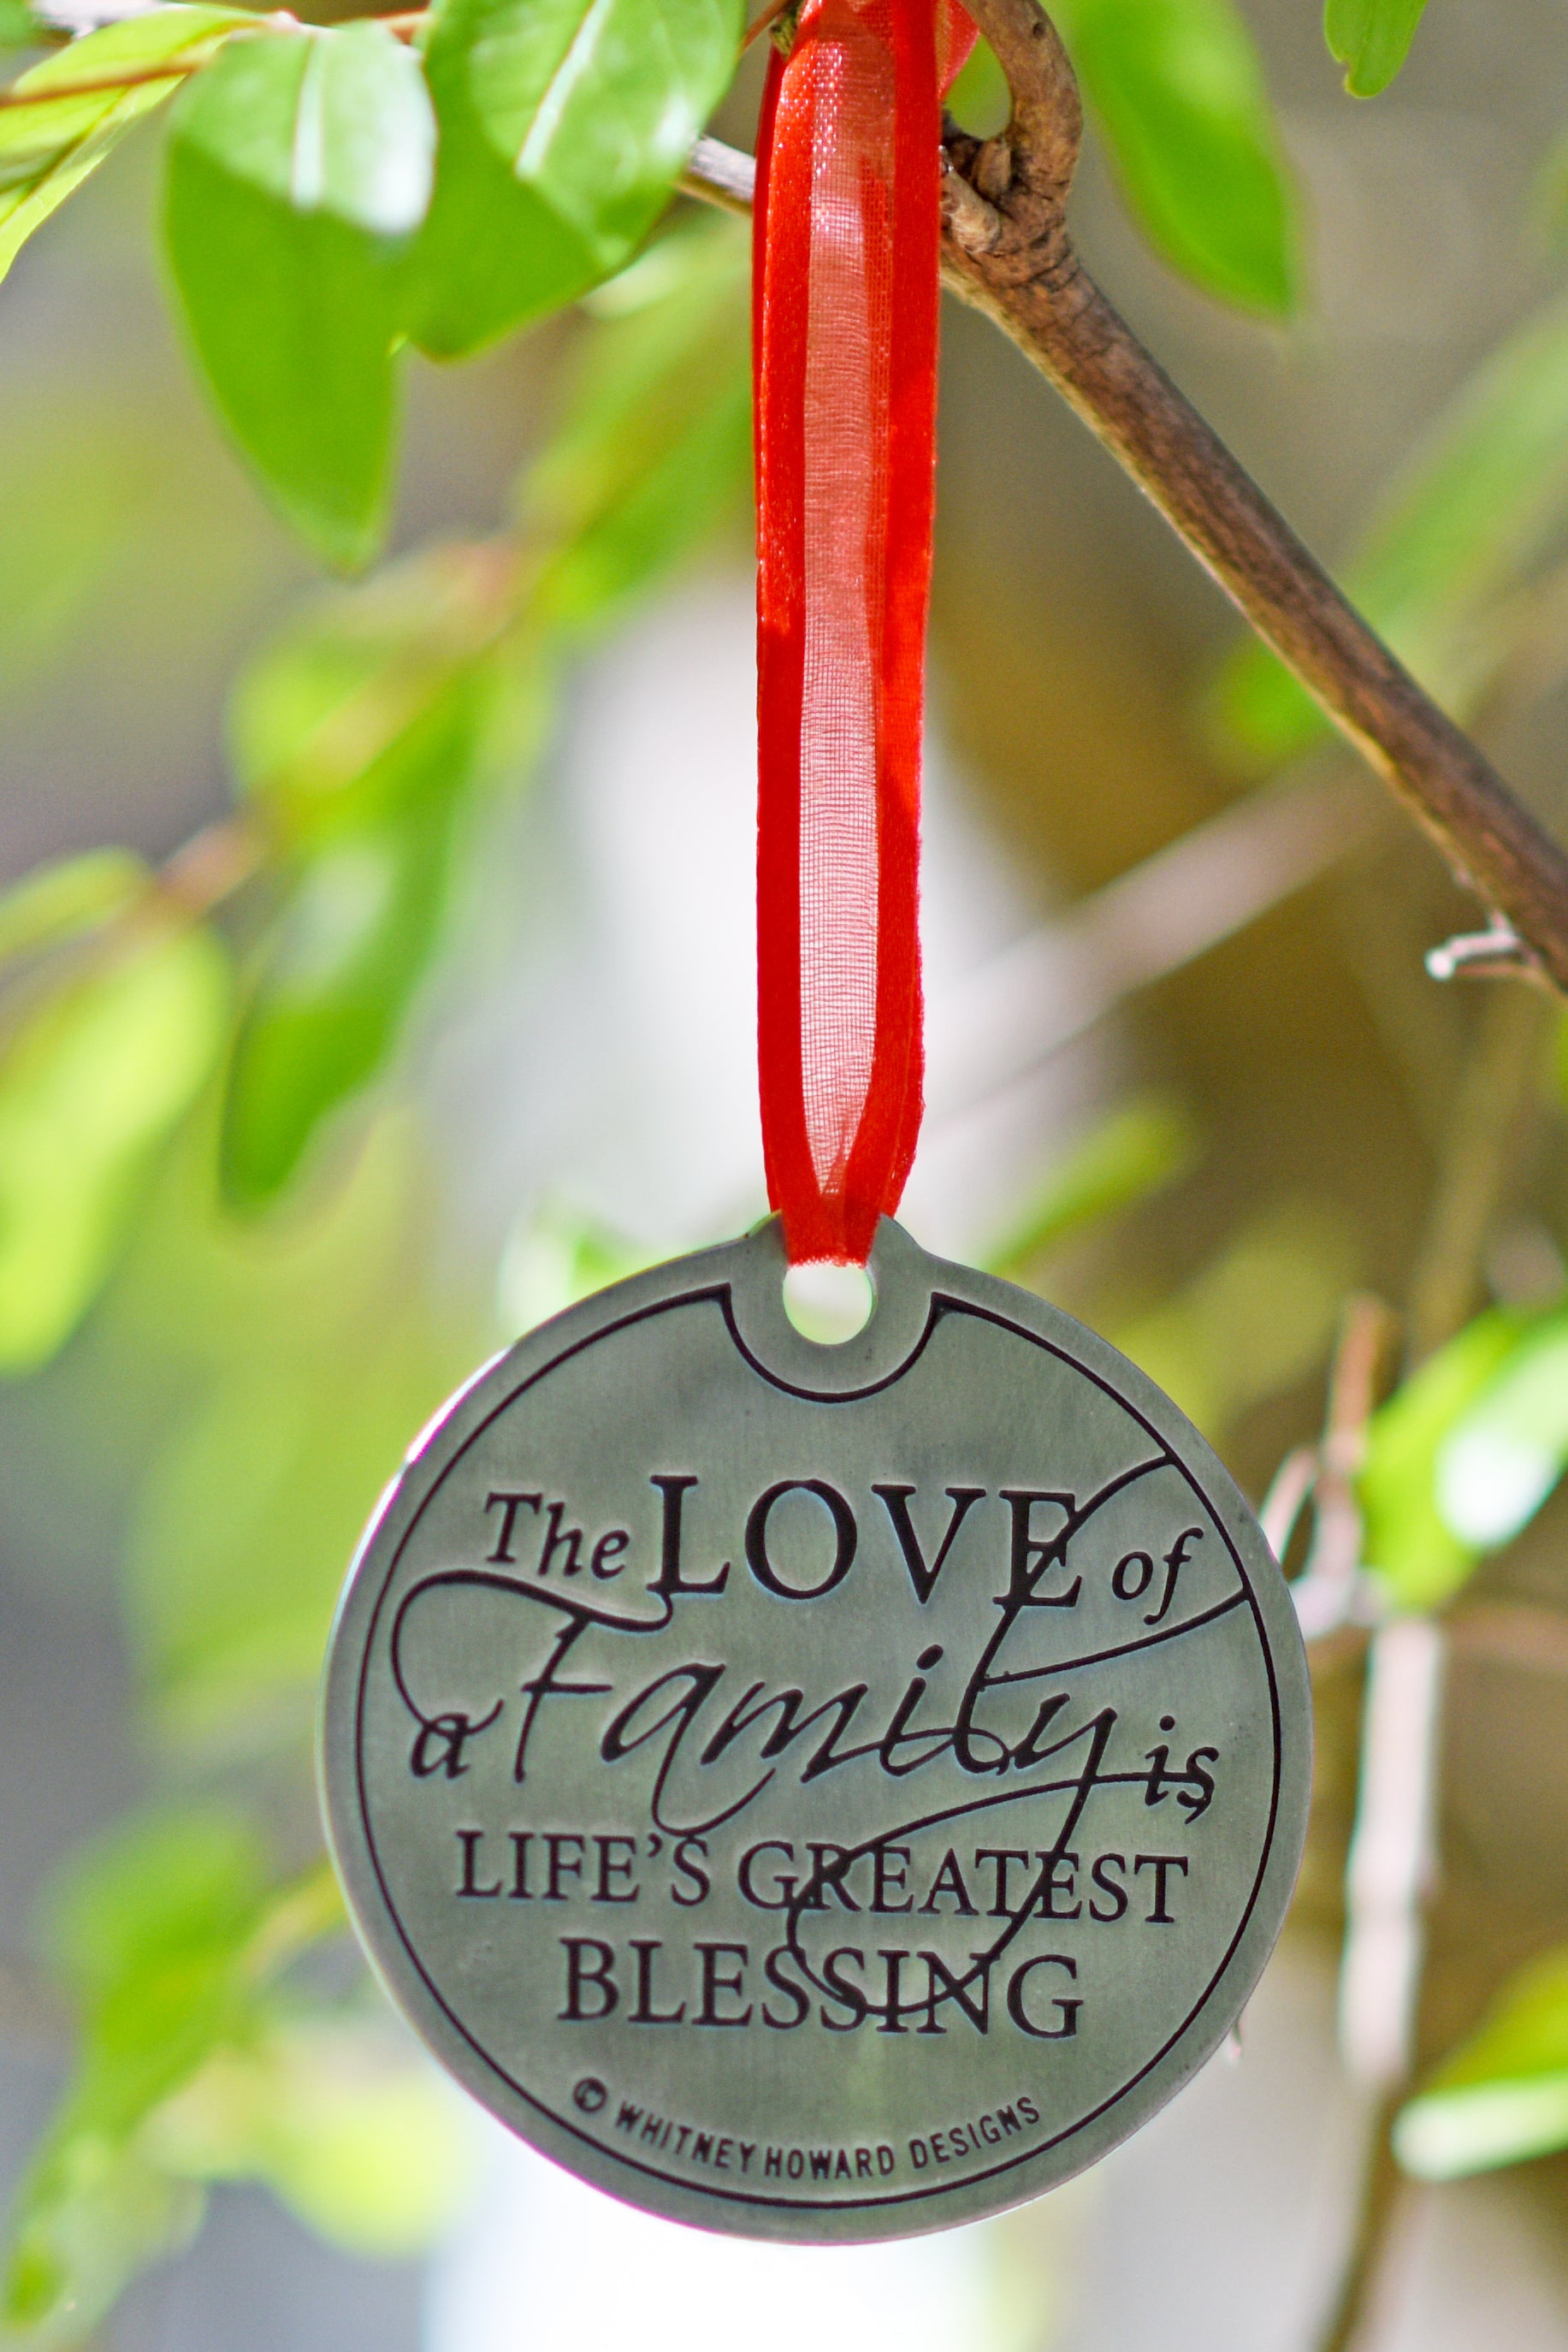 The Love of a Family is Life's Greatest Blessing Holiday Ornament hanging